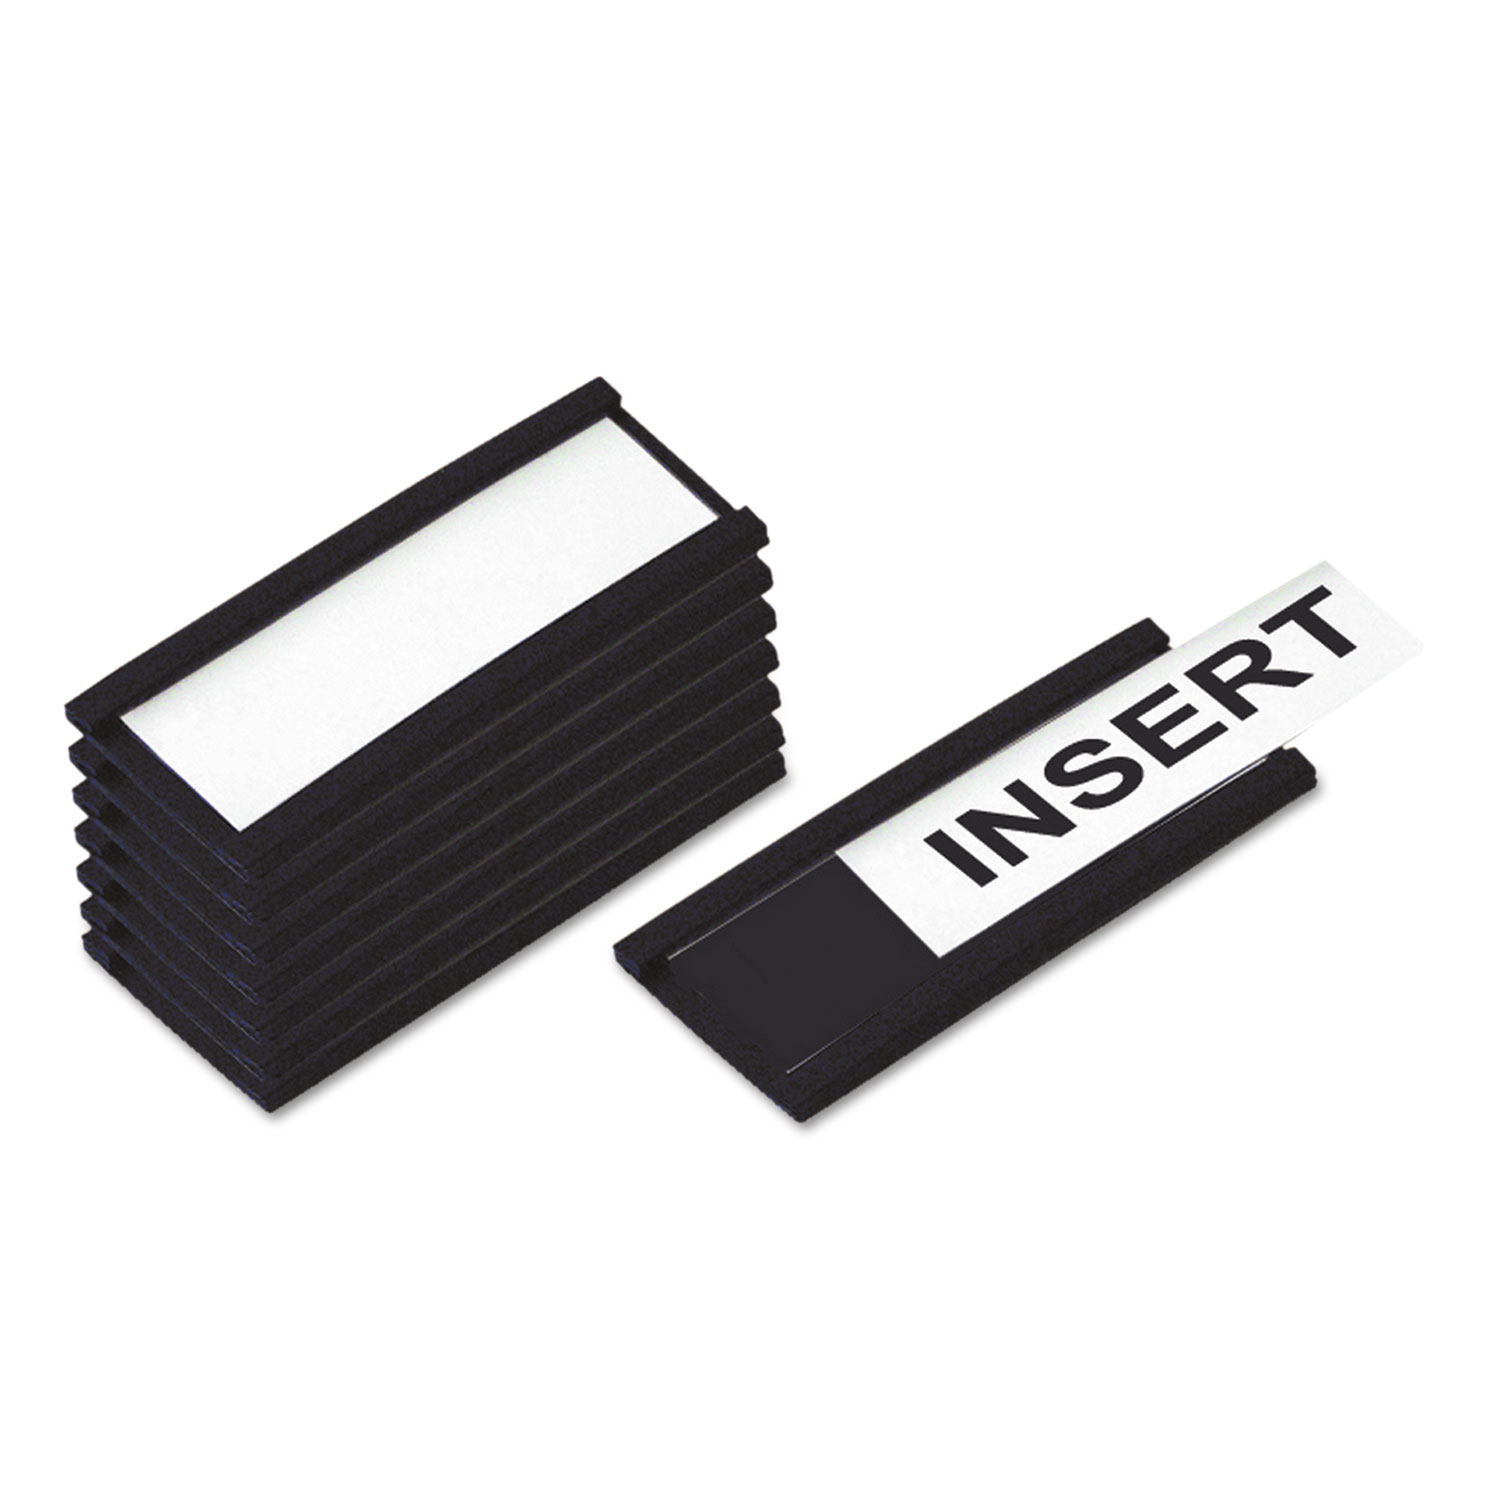 Magnetic Card Holders, 2w x 1h, Black, 25/Pack